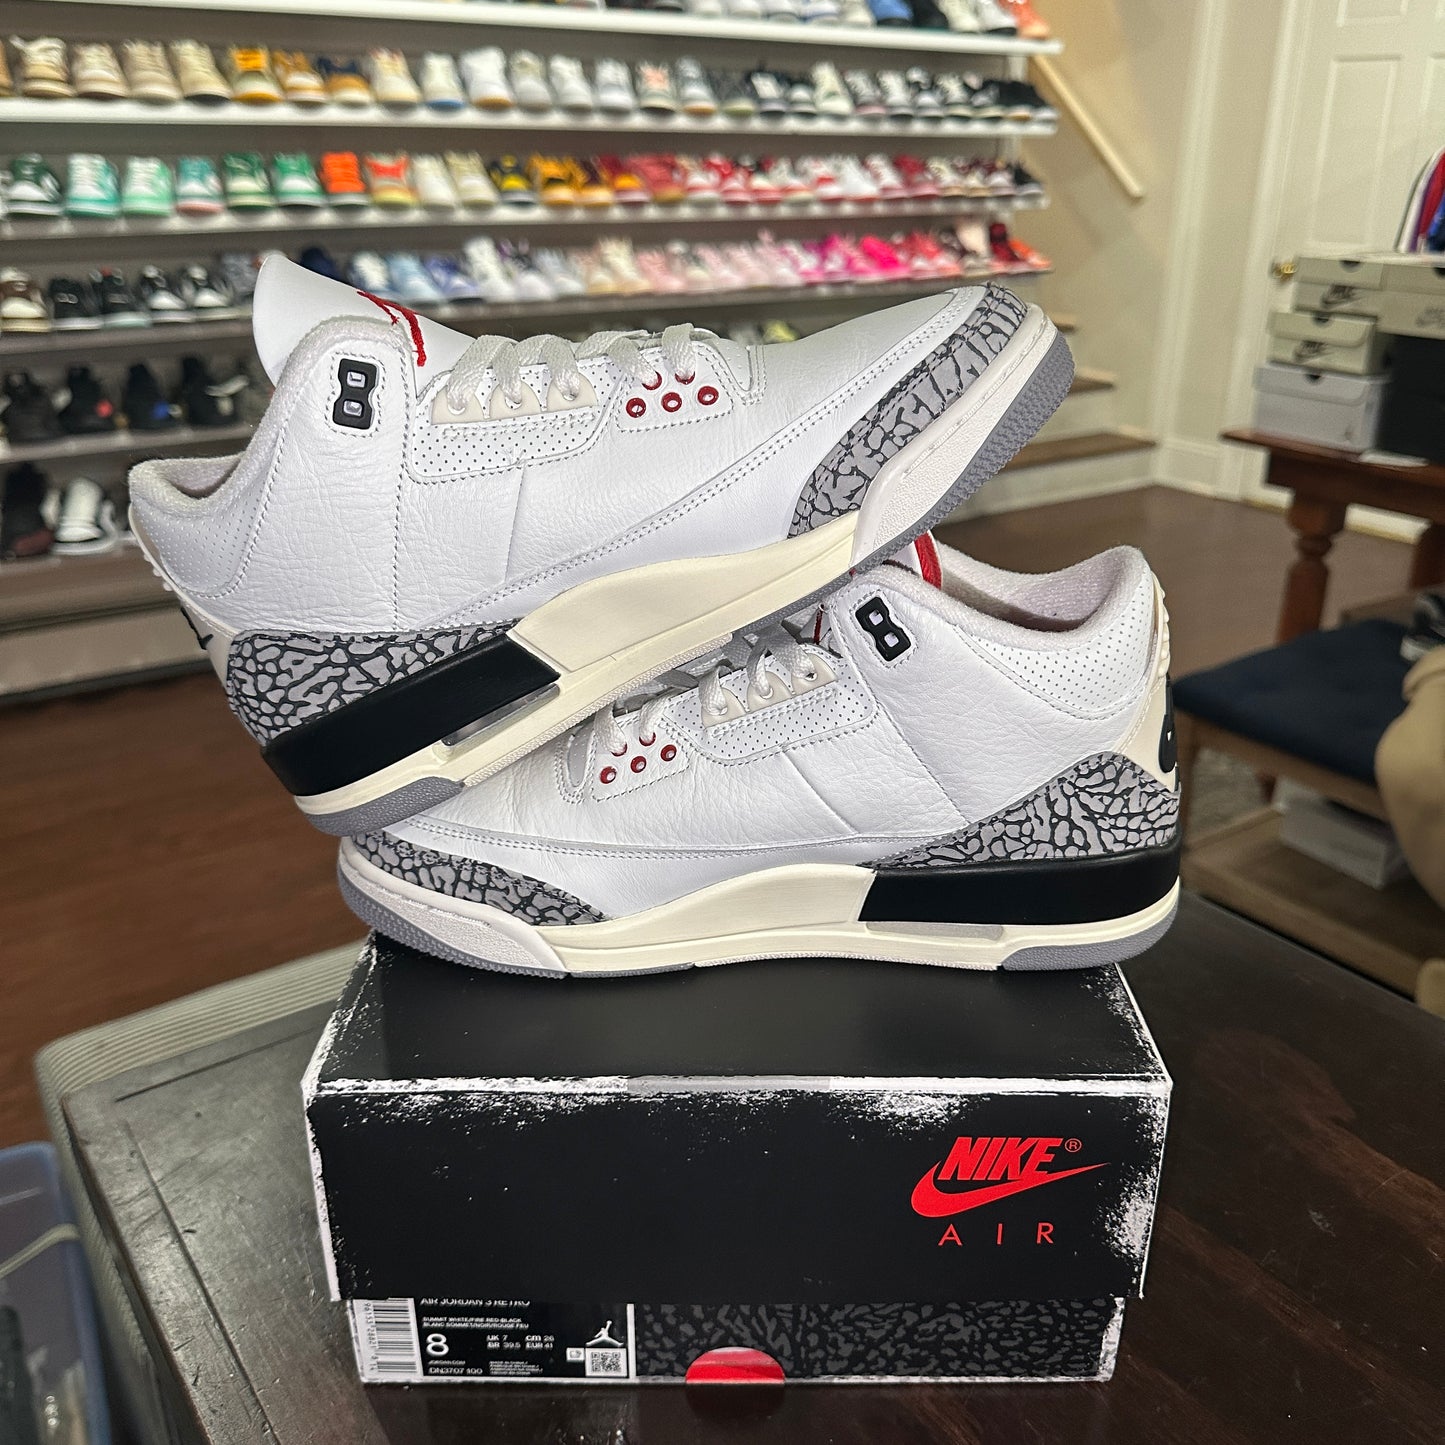 *USED* Air Jordan 3 Reimagined White Cement (size 8)